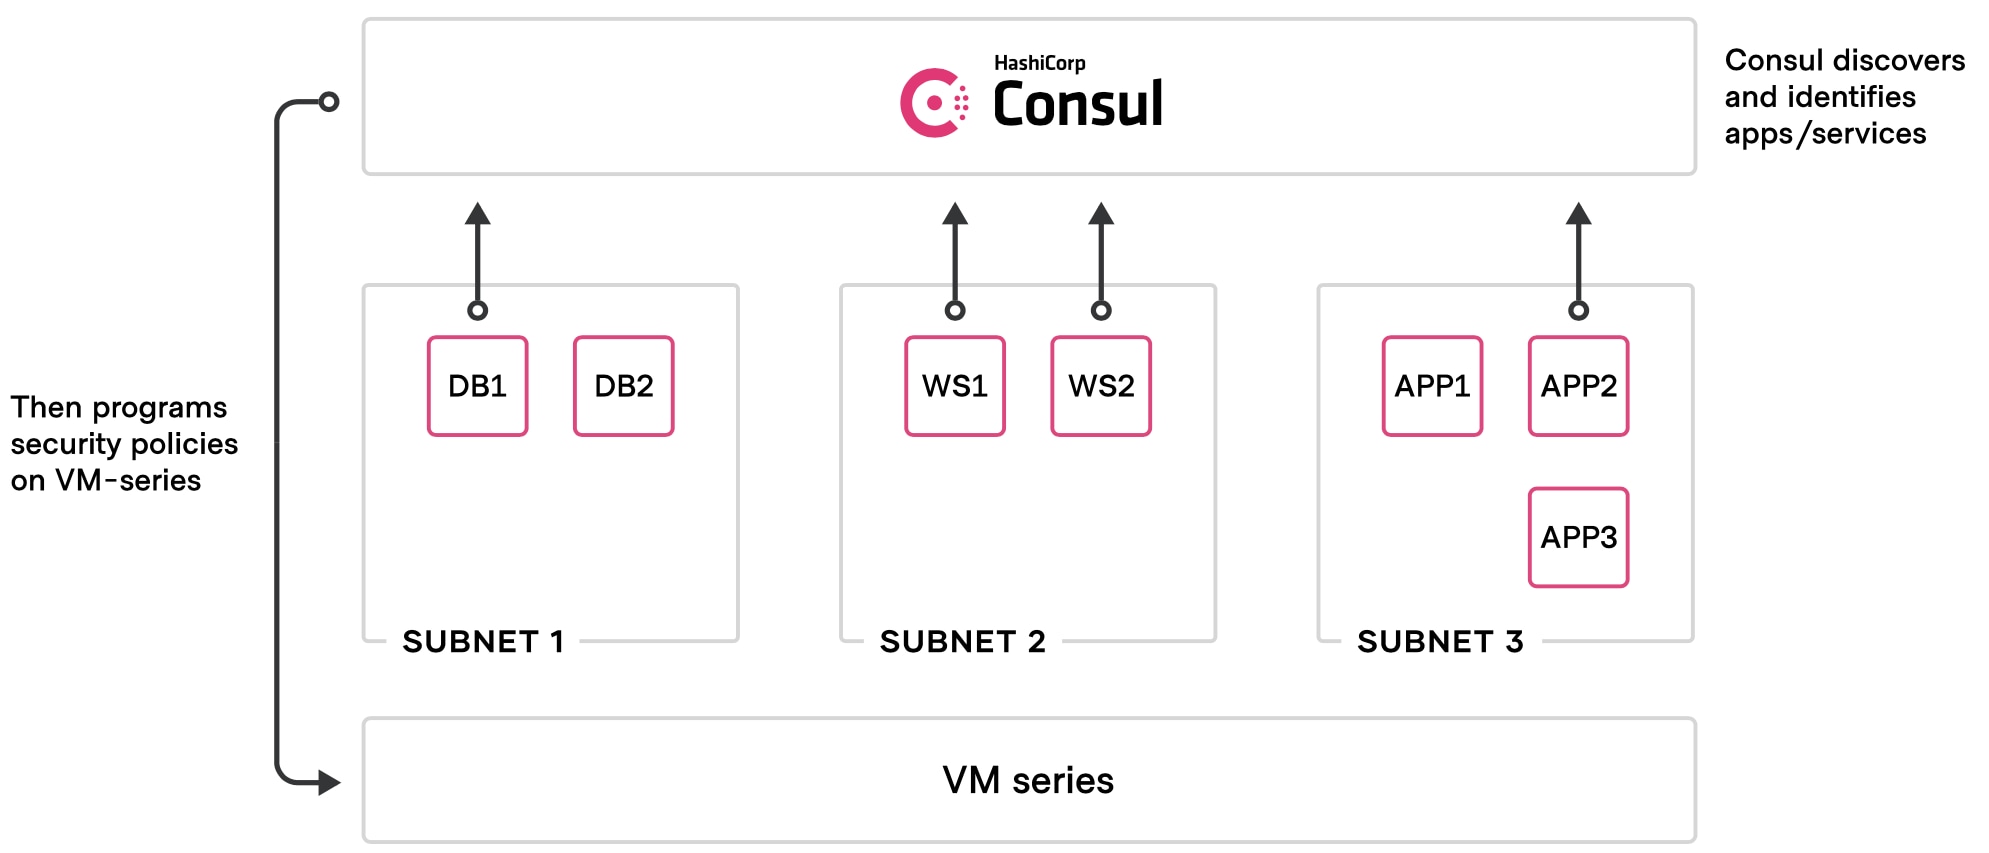 Figure 2. HashiCorp Consul service discovery integration with VM-Series NGFWs